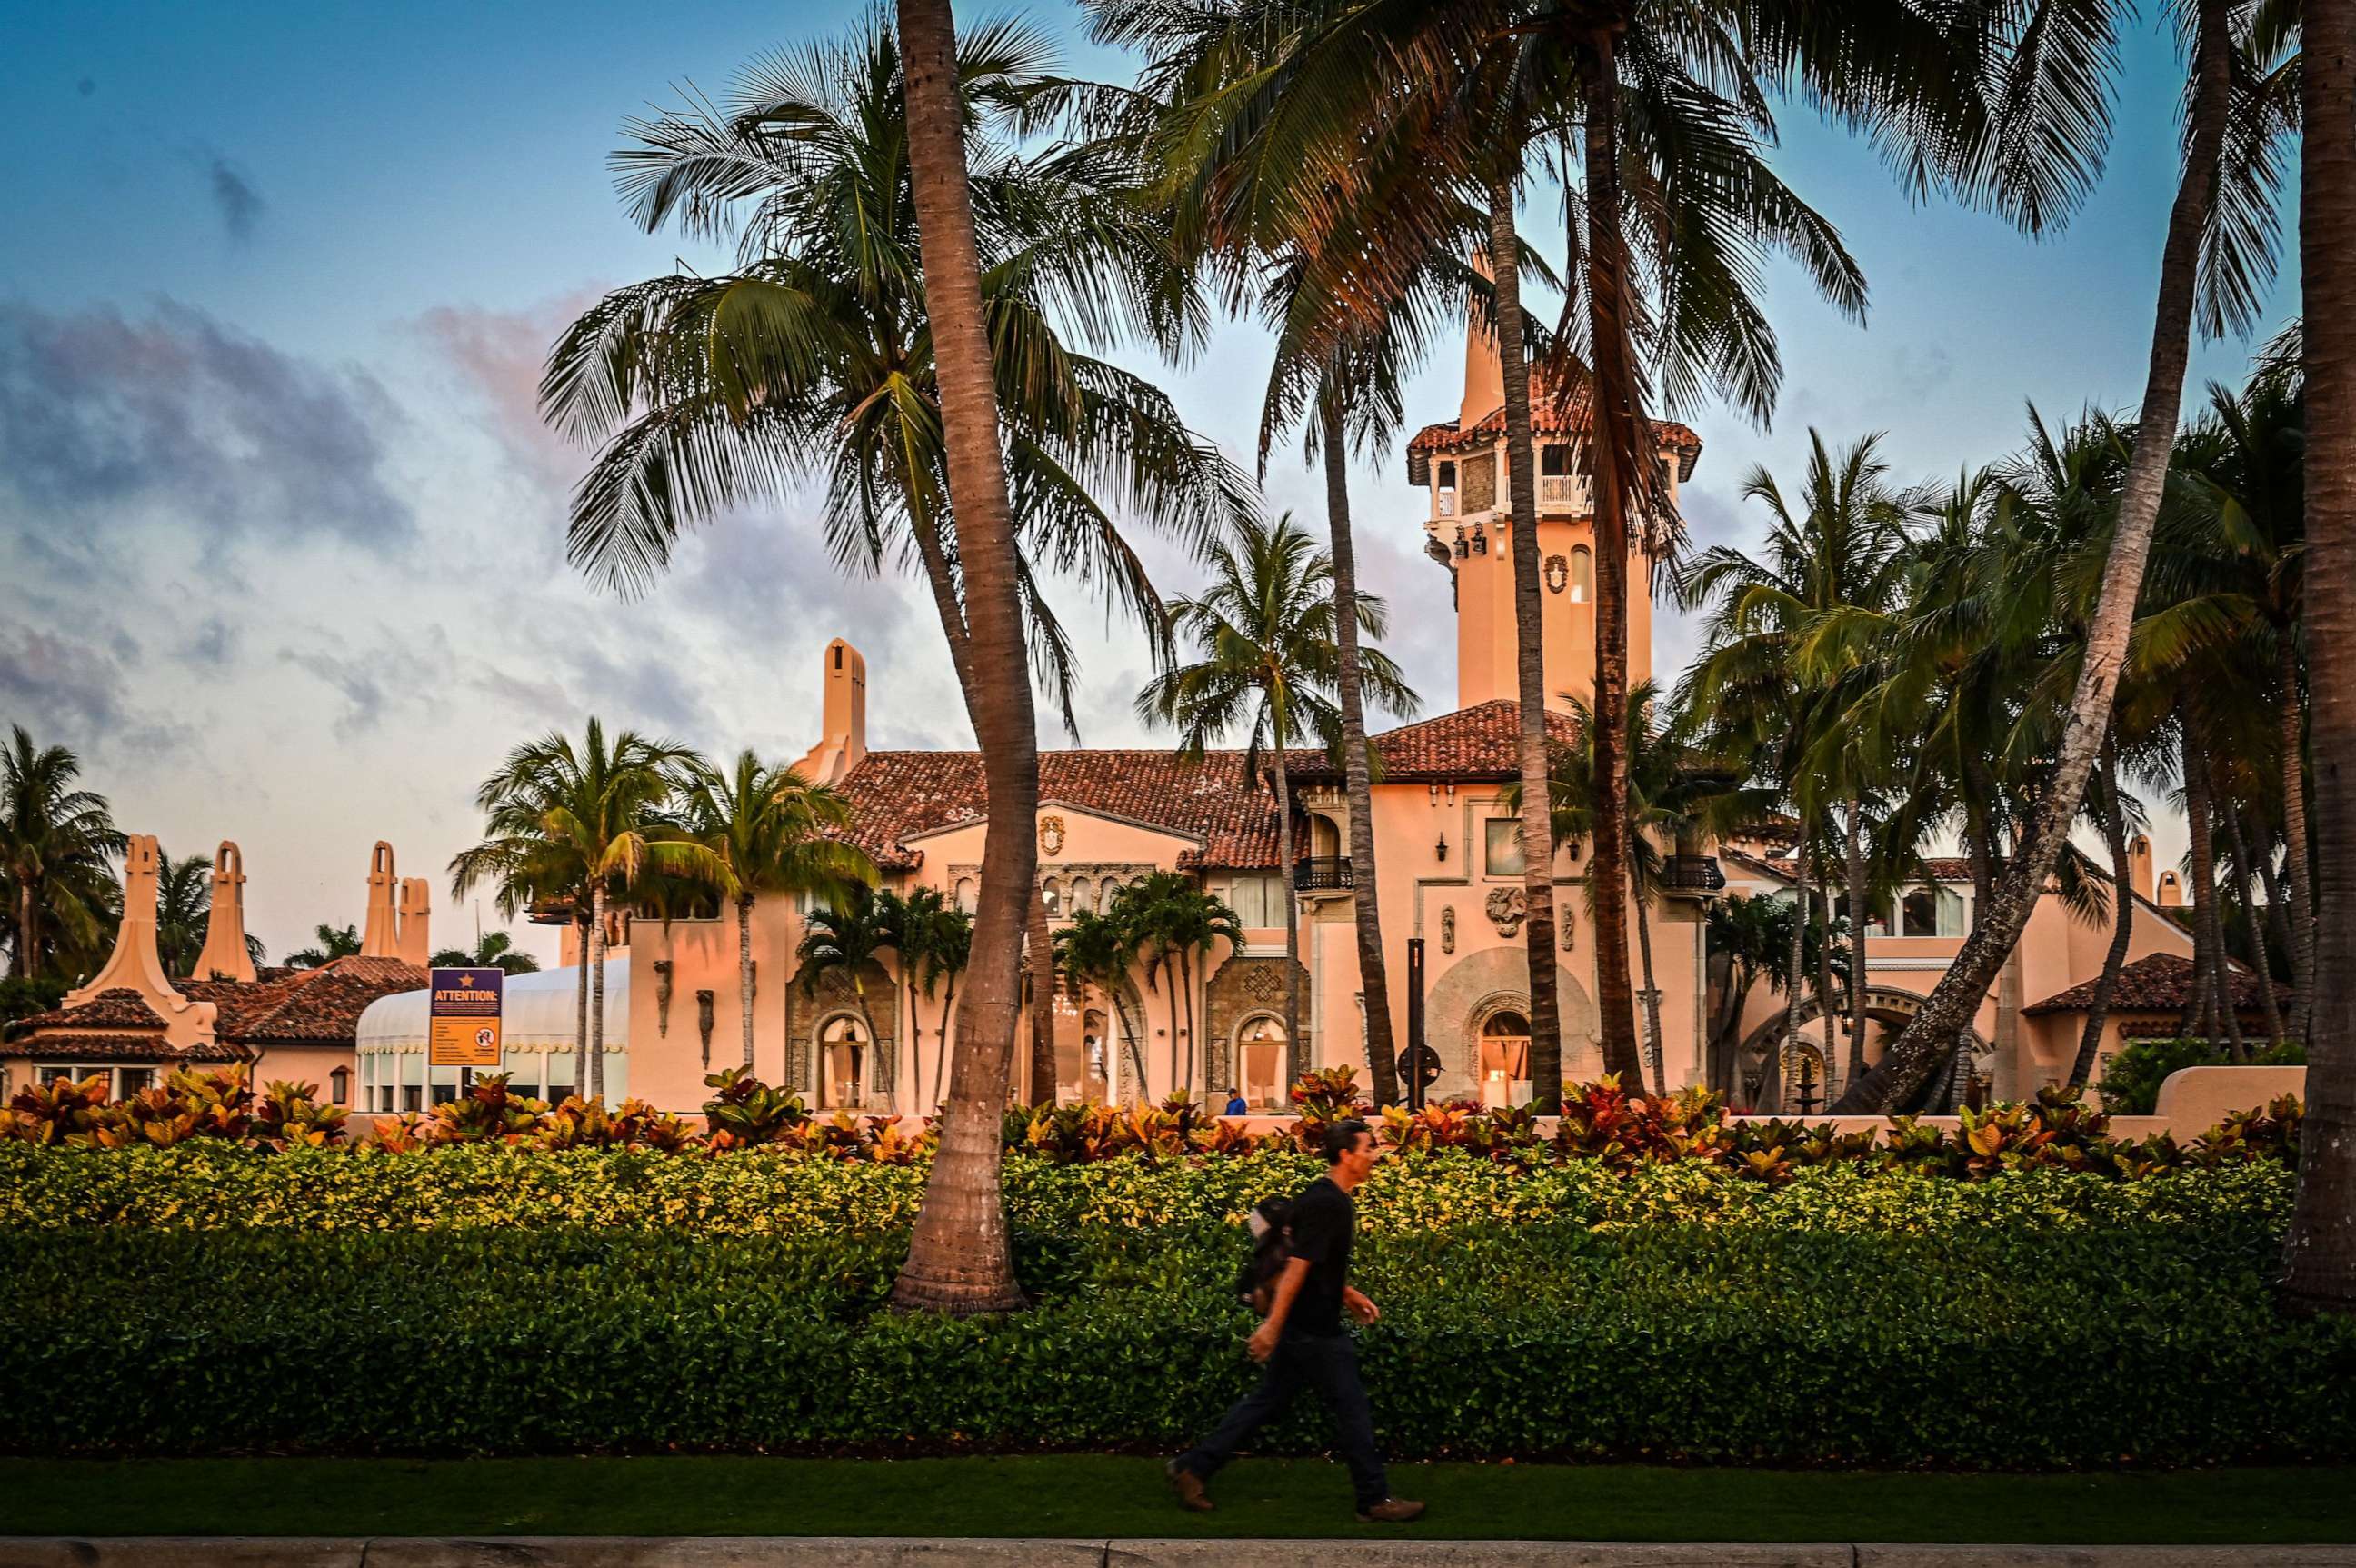 PHOTO: The Mar-a-Lago Club, home of former US President Donald Trump, is seen on April 3, 2023 in Palm Beach, Fla.